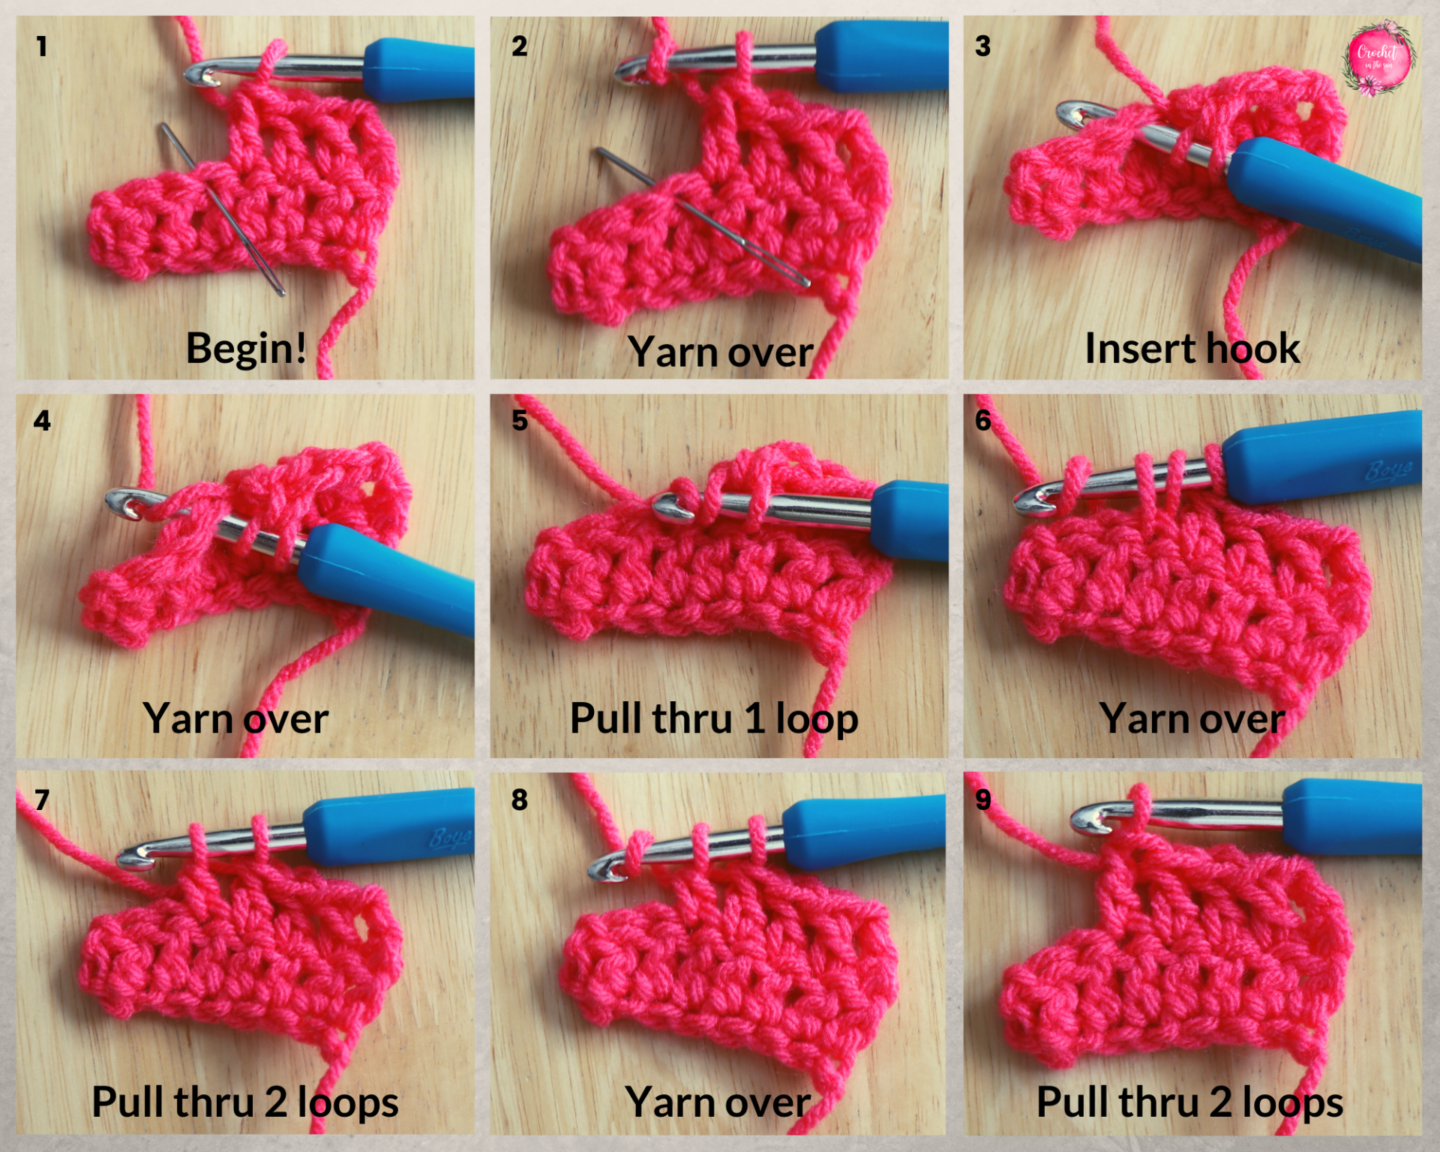 Learn to Crochet Easily - Step-by-Step Tutorial for Beginners 